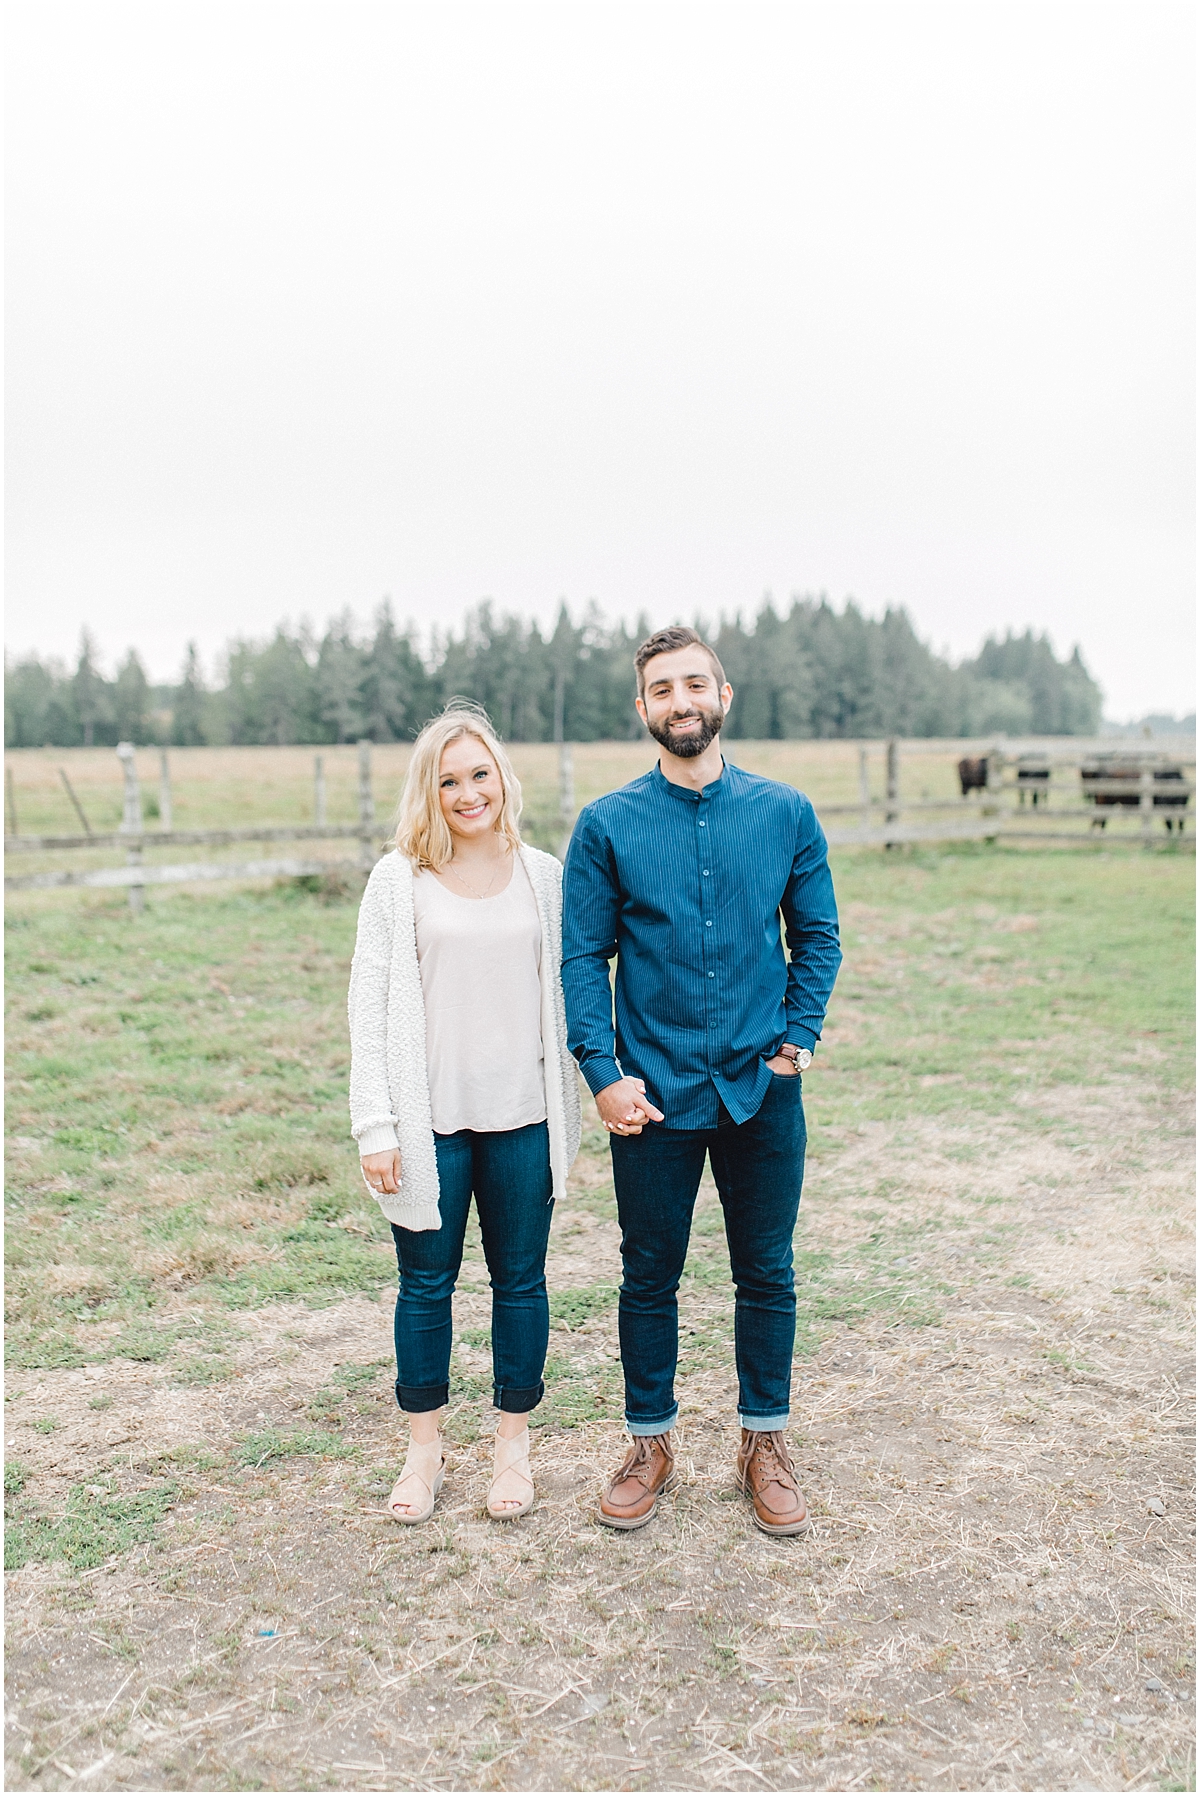 Emma Rose Company | PNW Engagement Session | What to Wear for Pictures | Rose Ranch Engagement | Sunset | Kindred Presets | Seattle Wedding Photographer Light and Airy_0276.jpg